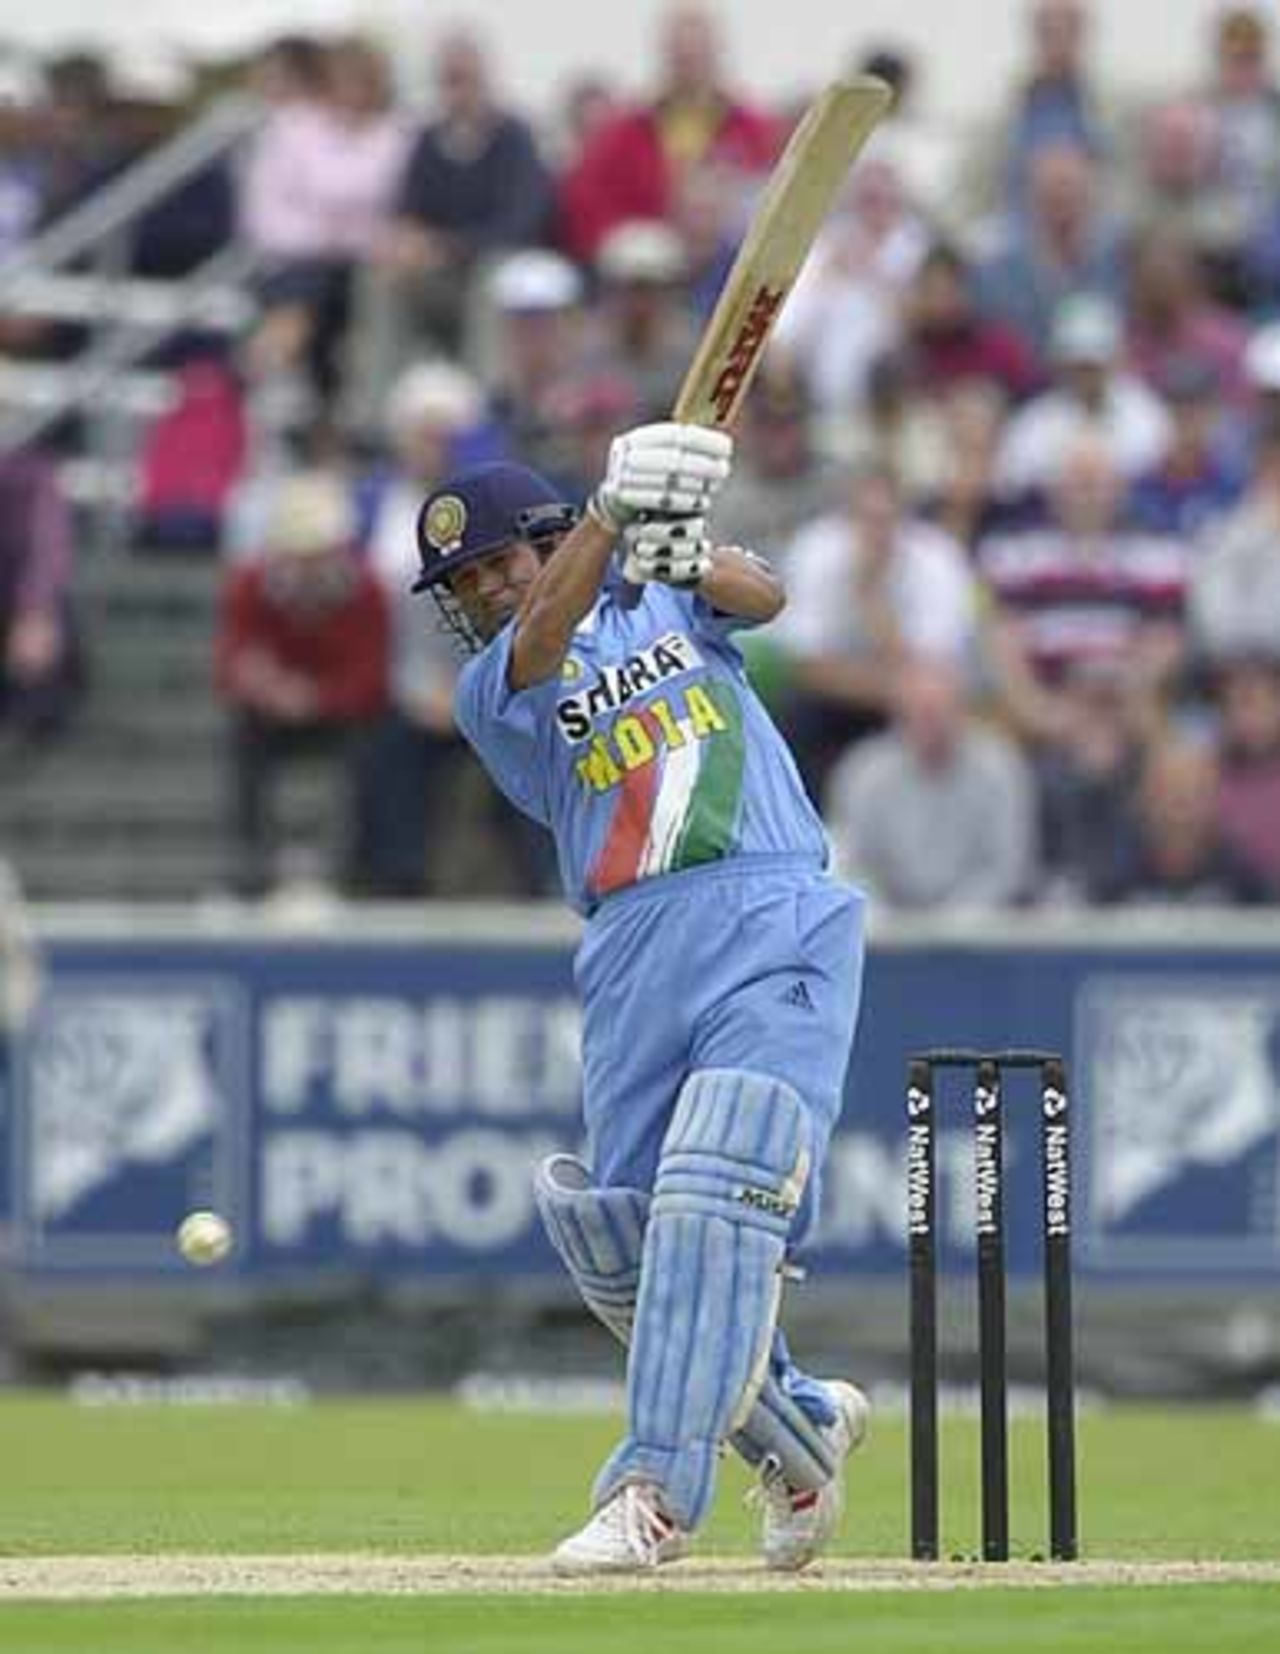 Tendulkar drives in his century at The Riverside, England v India at Chester-le-Street, July 2002